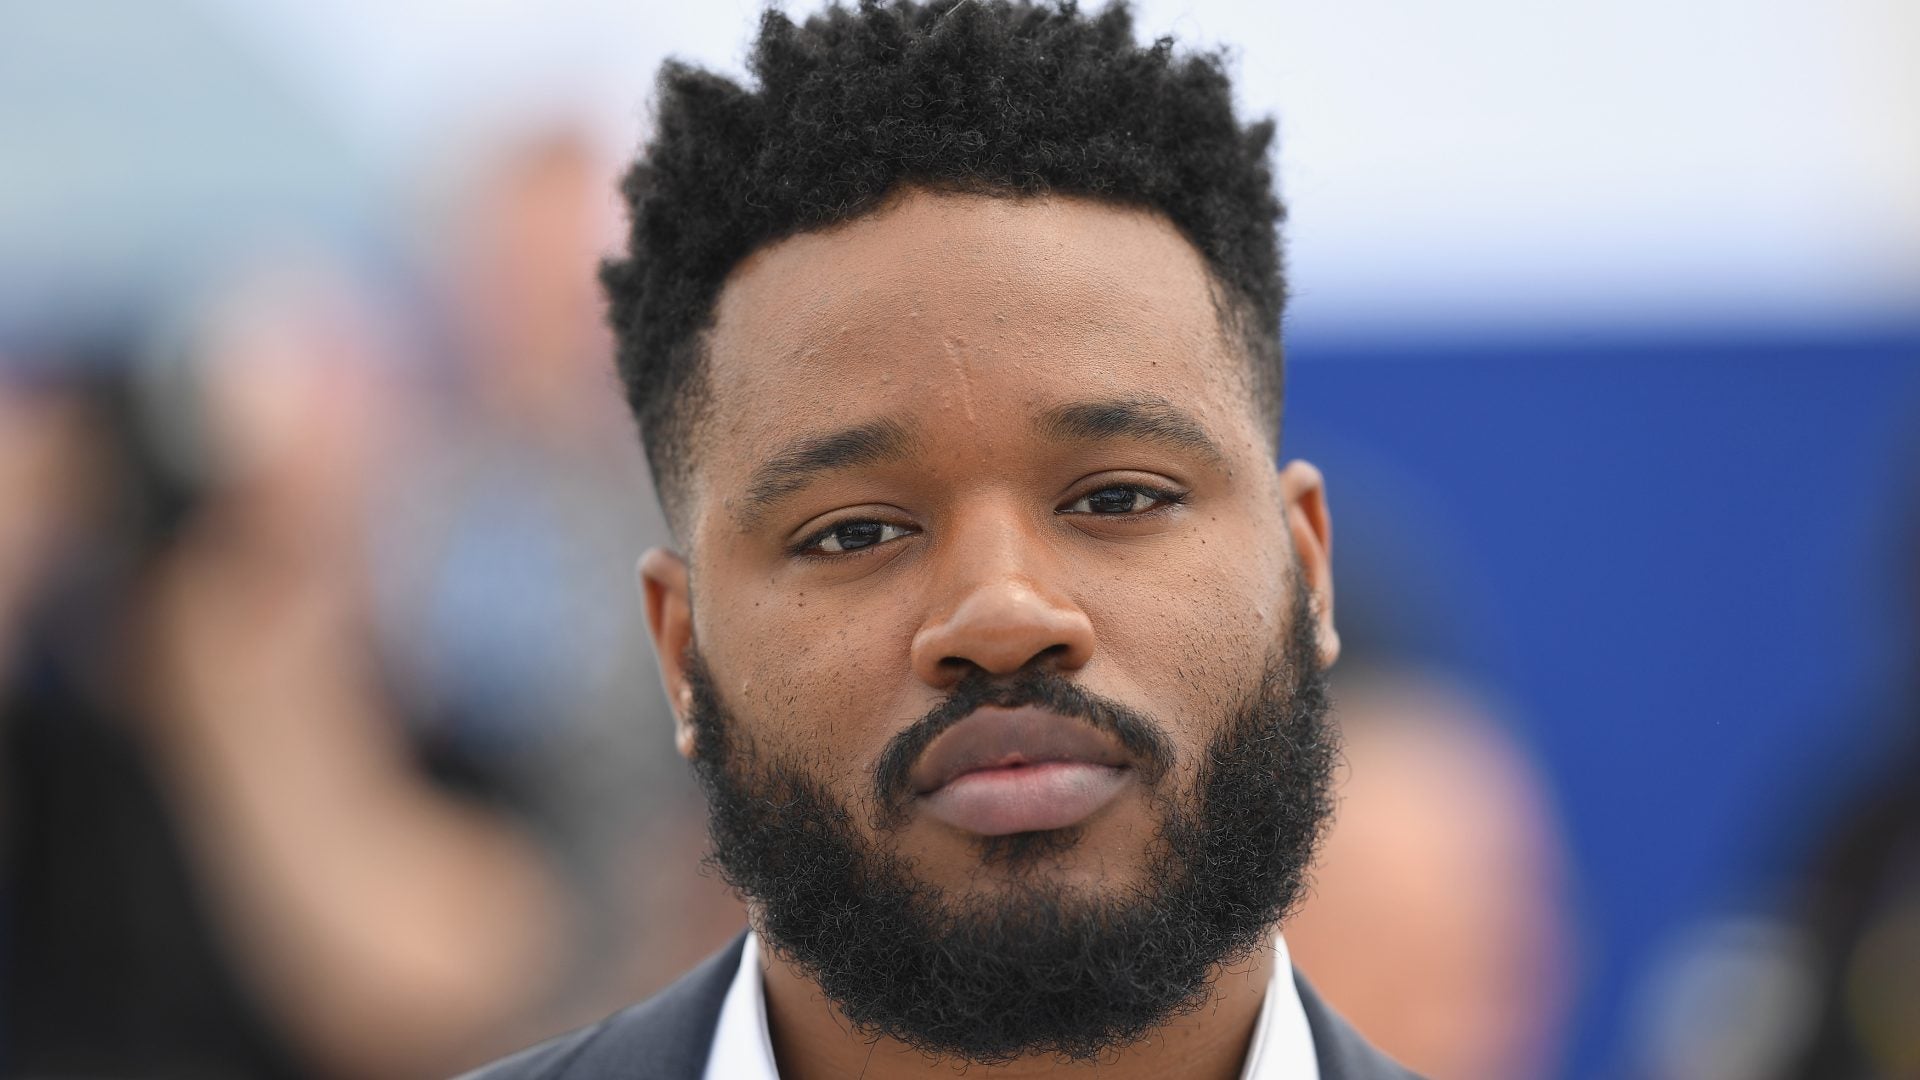 Ryan Coogler Detained At Atlanta Bank After Attempting to Withdraw $12,000 From His Account